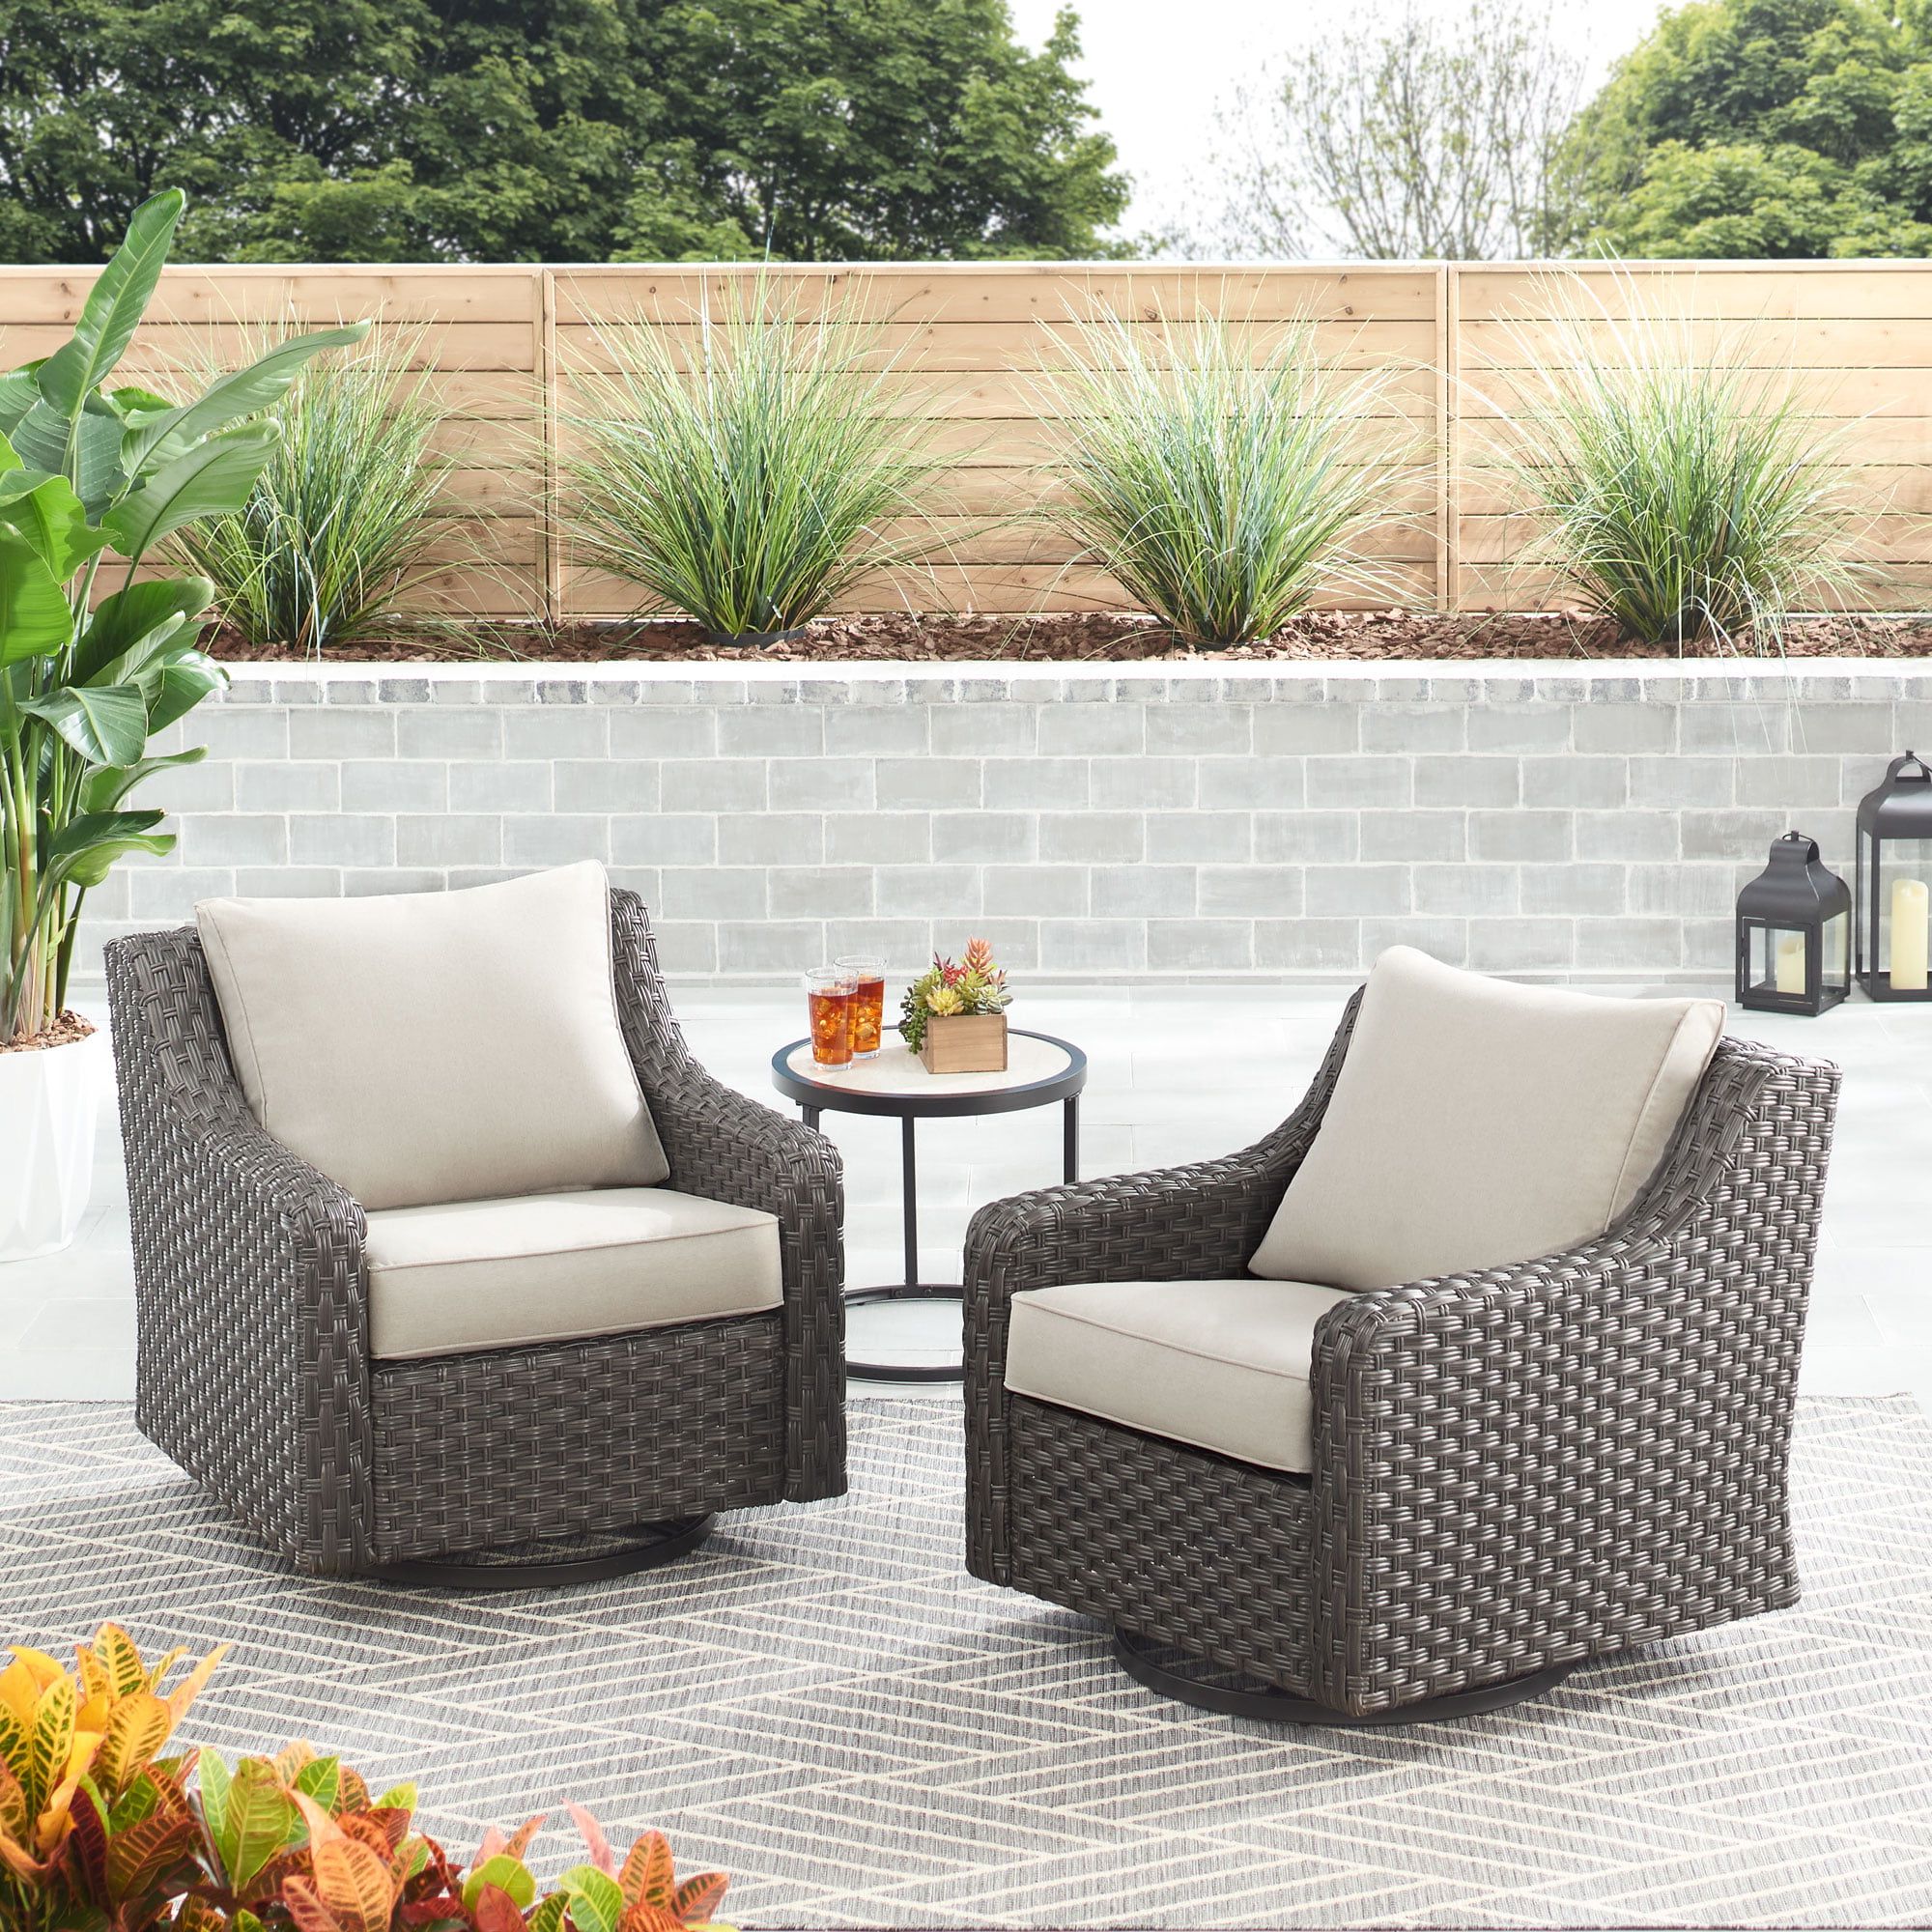 2 Piece Swivel Gliders With Patio Cover Regarding Trendy Better Homes & Gardens River Oaks 2 Piece Wicker Swivel Glider With Patio  Covers, Dark – Walmart (View 3 of 15)